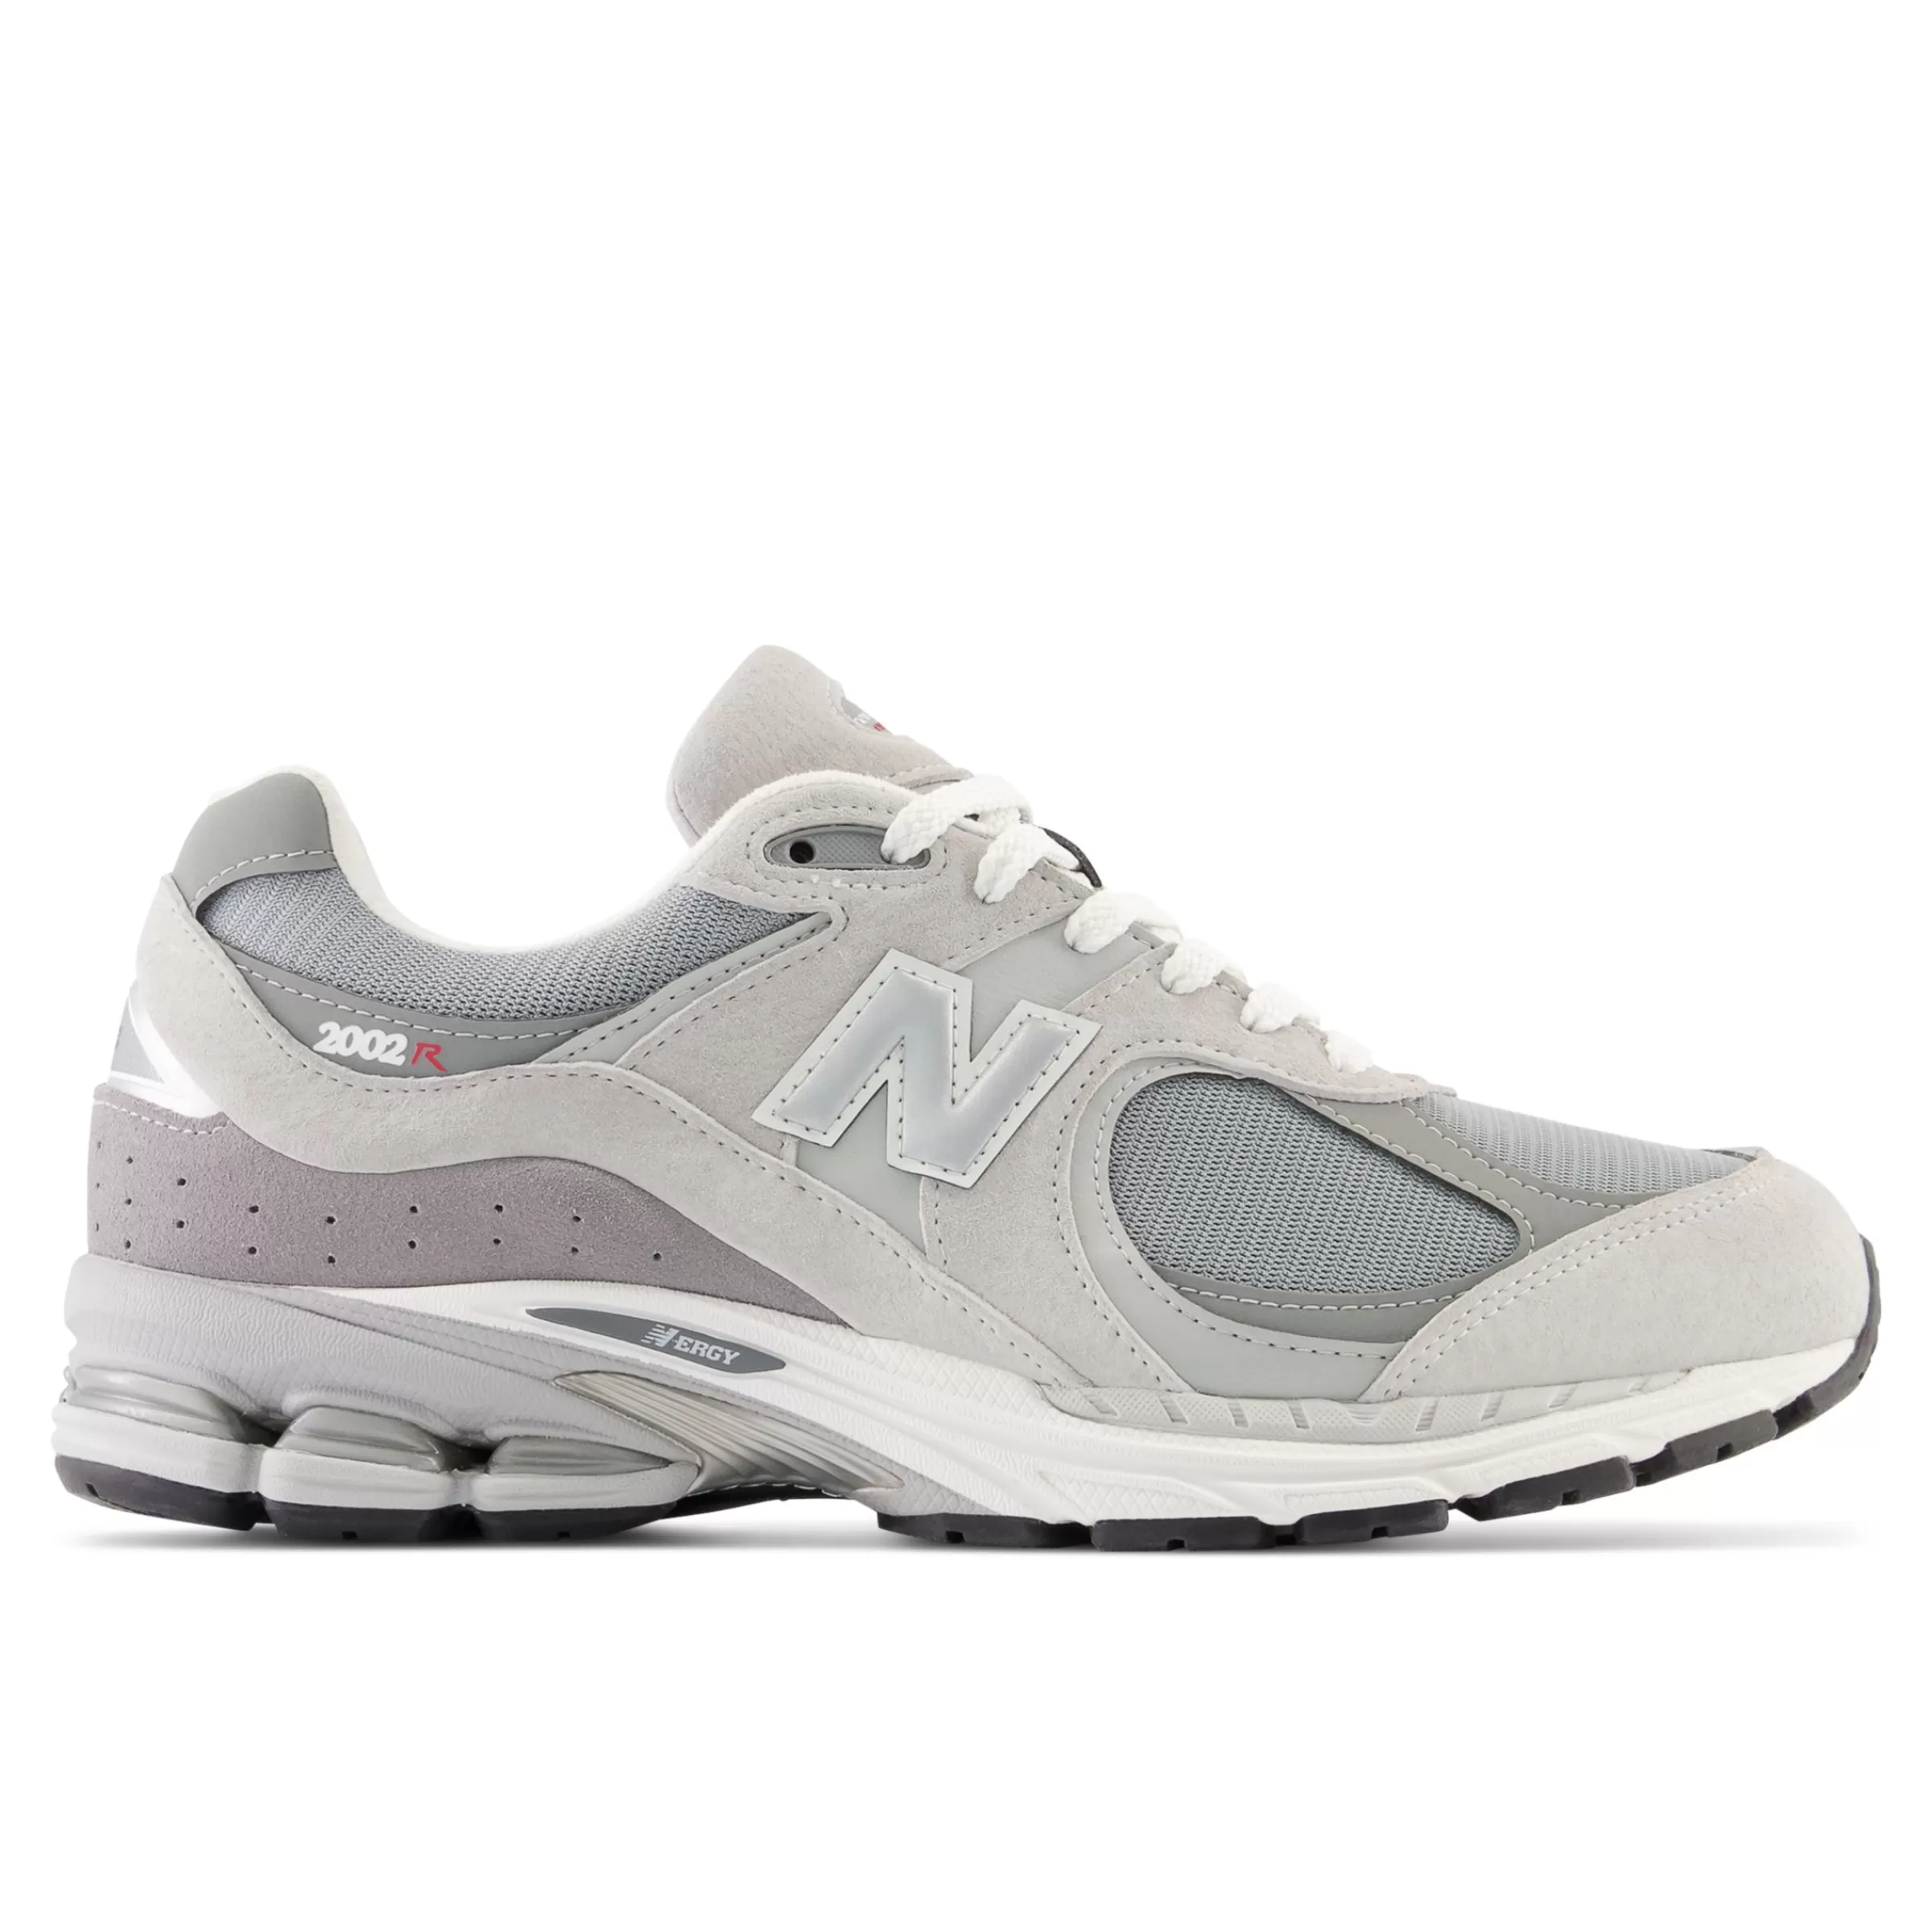 New Balance Chaussures Soldes-2002RX